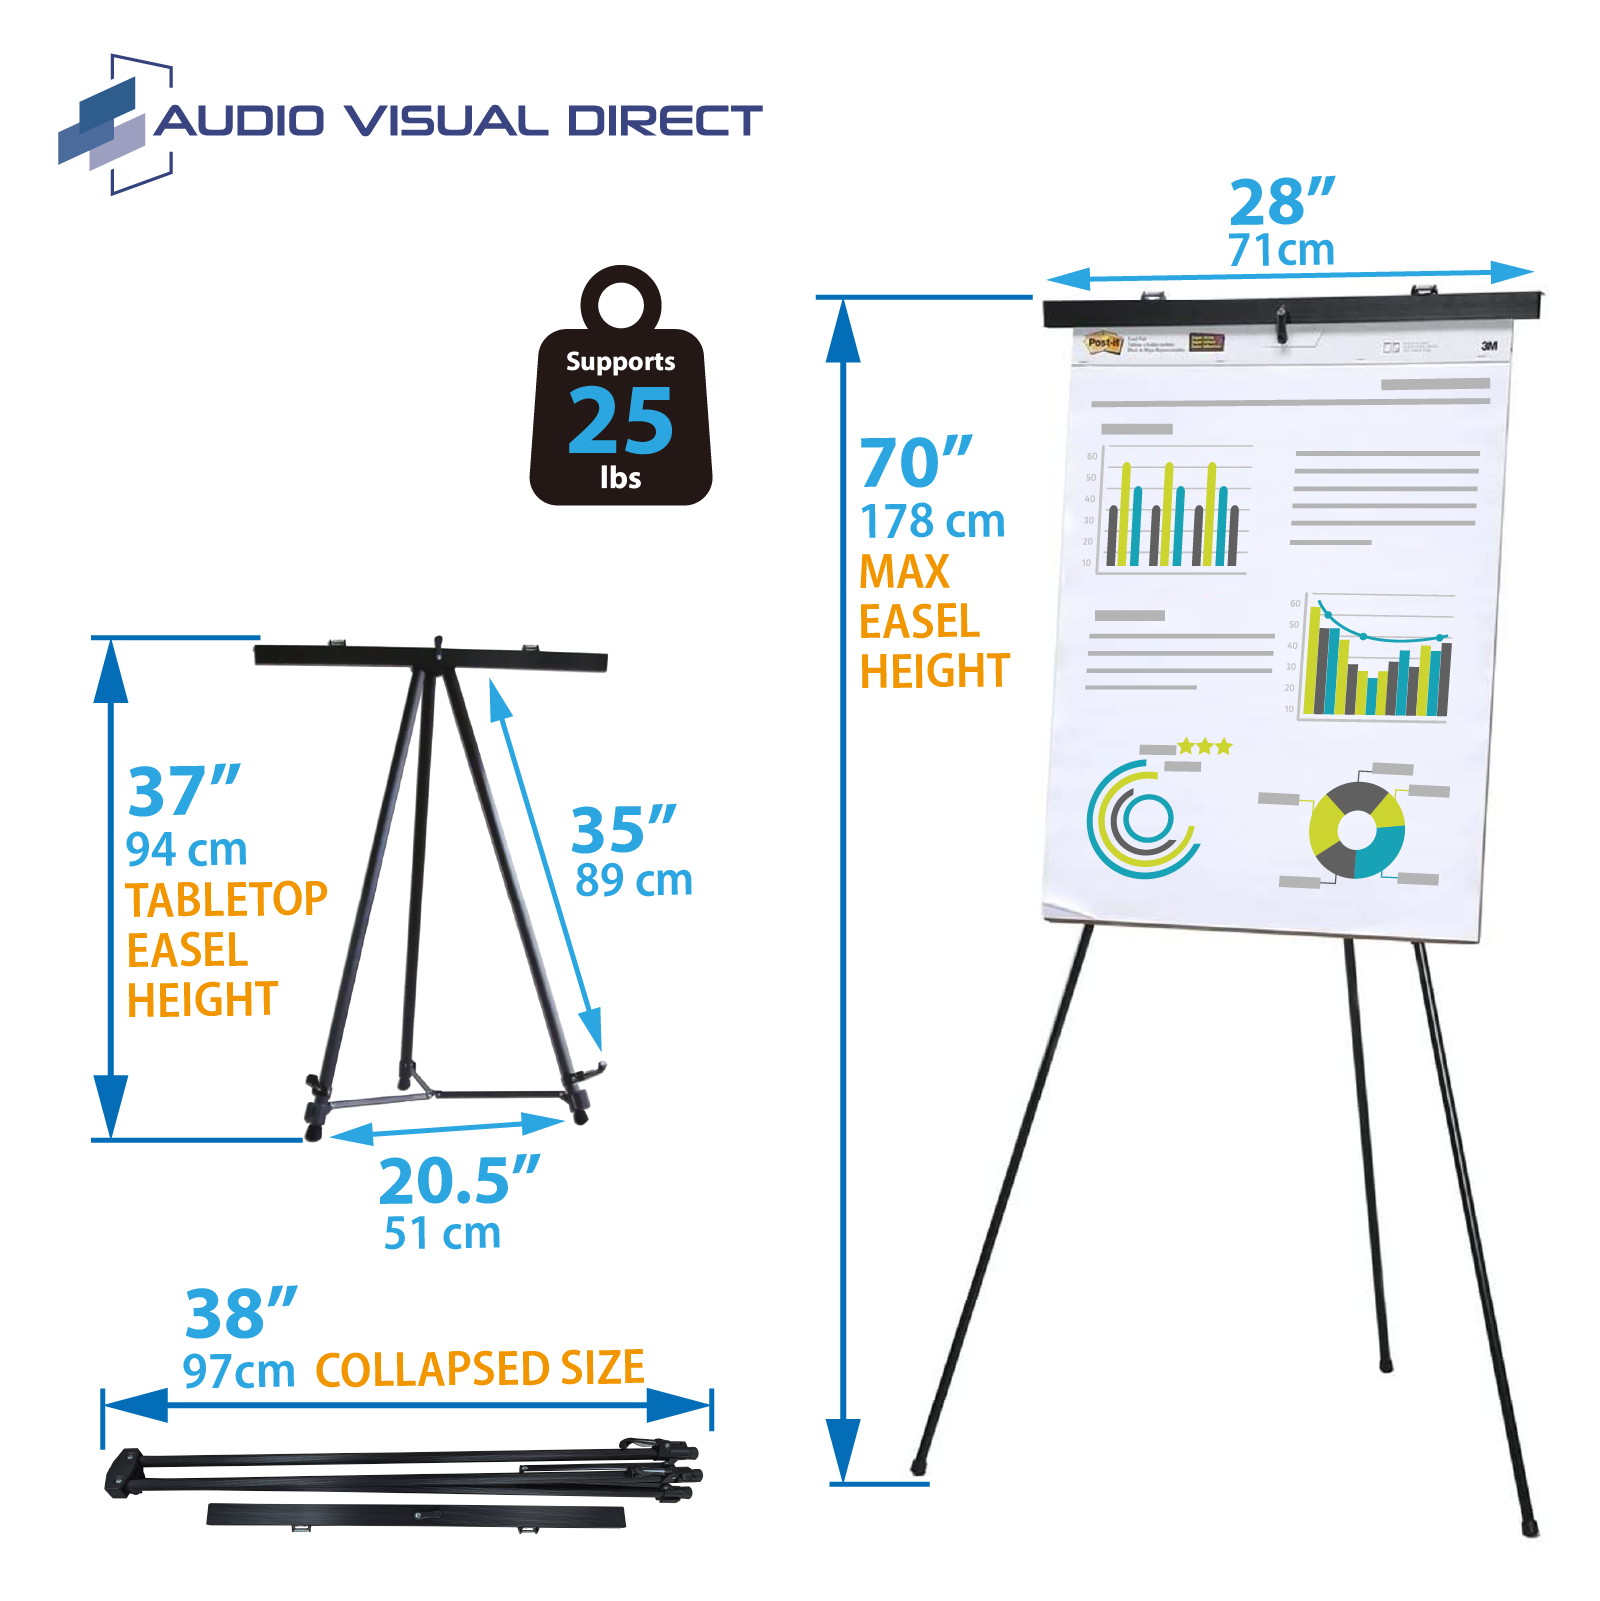 Info Graphic for our presentation easel. Shows the height from 37" to 70". Also shows it can support up to 25 lbs.